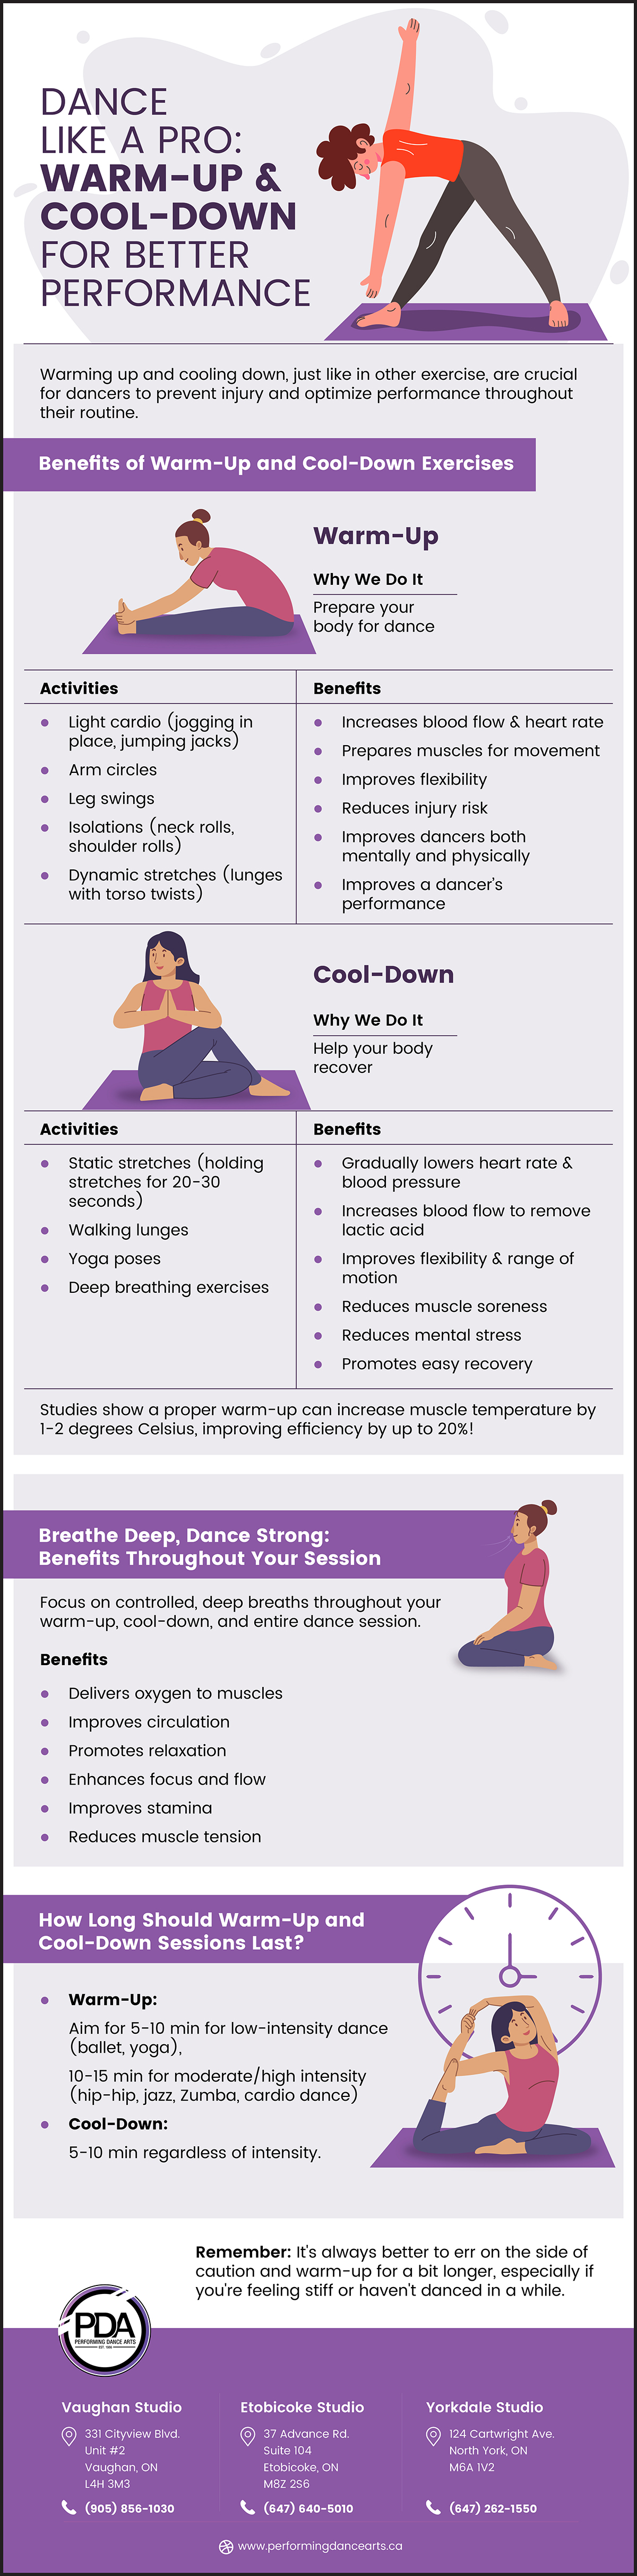 benefits of warm up and cool down before and after dance